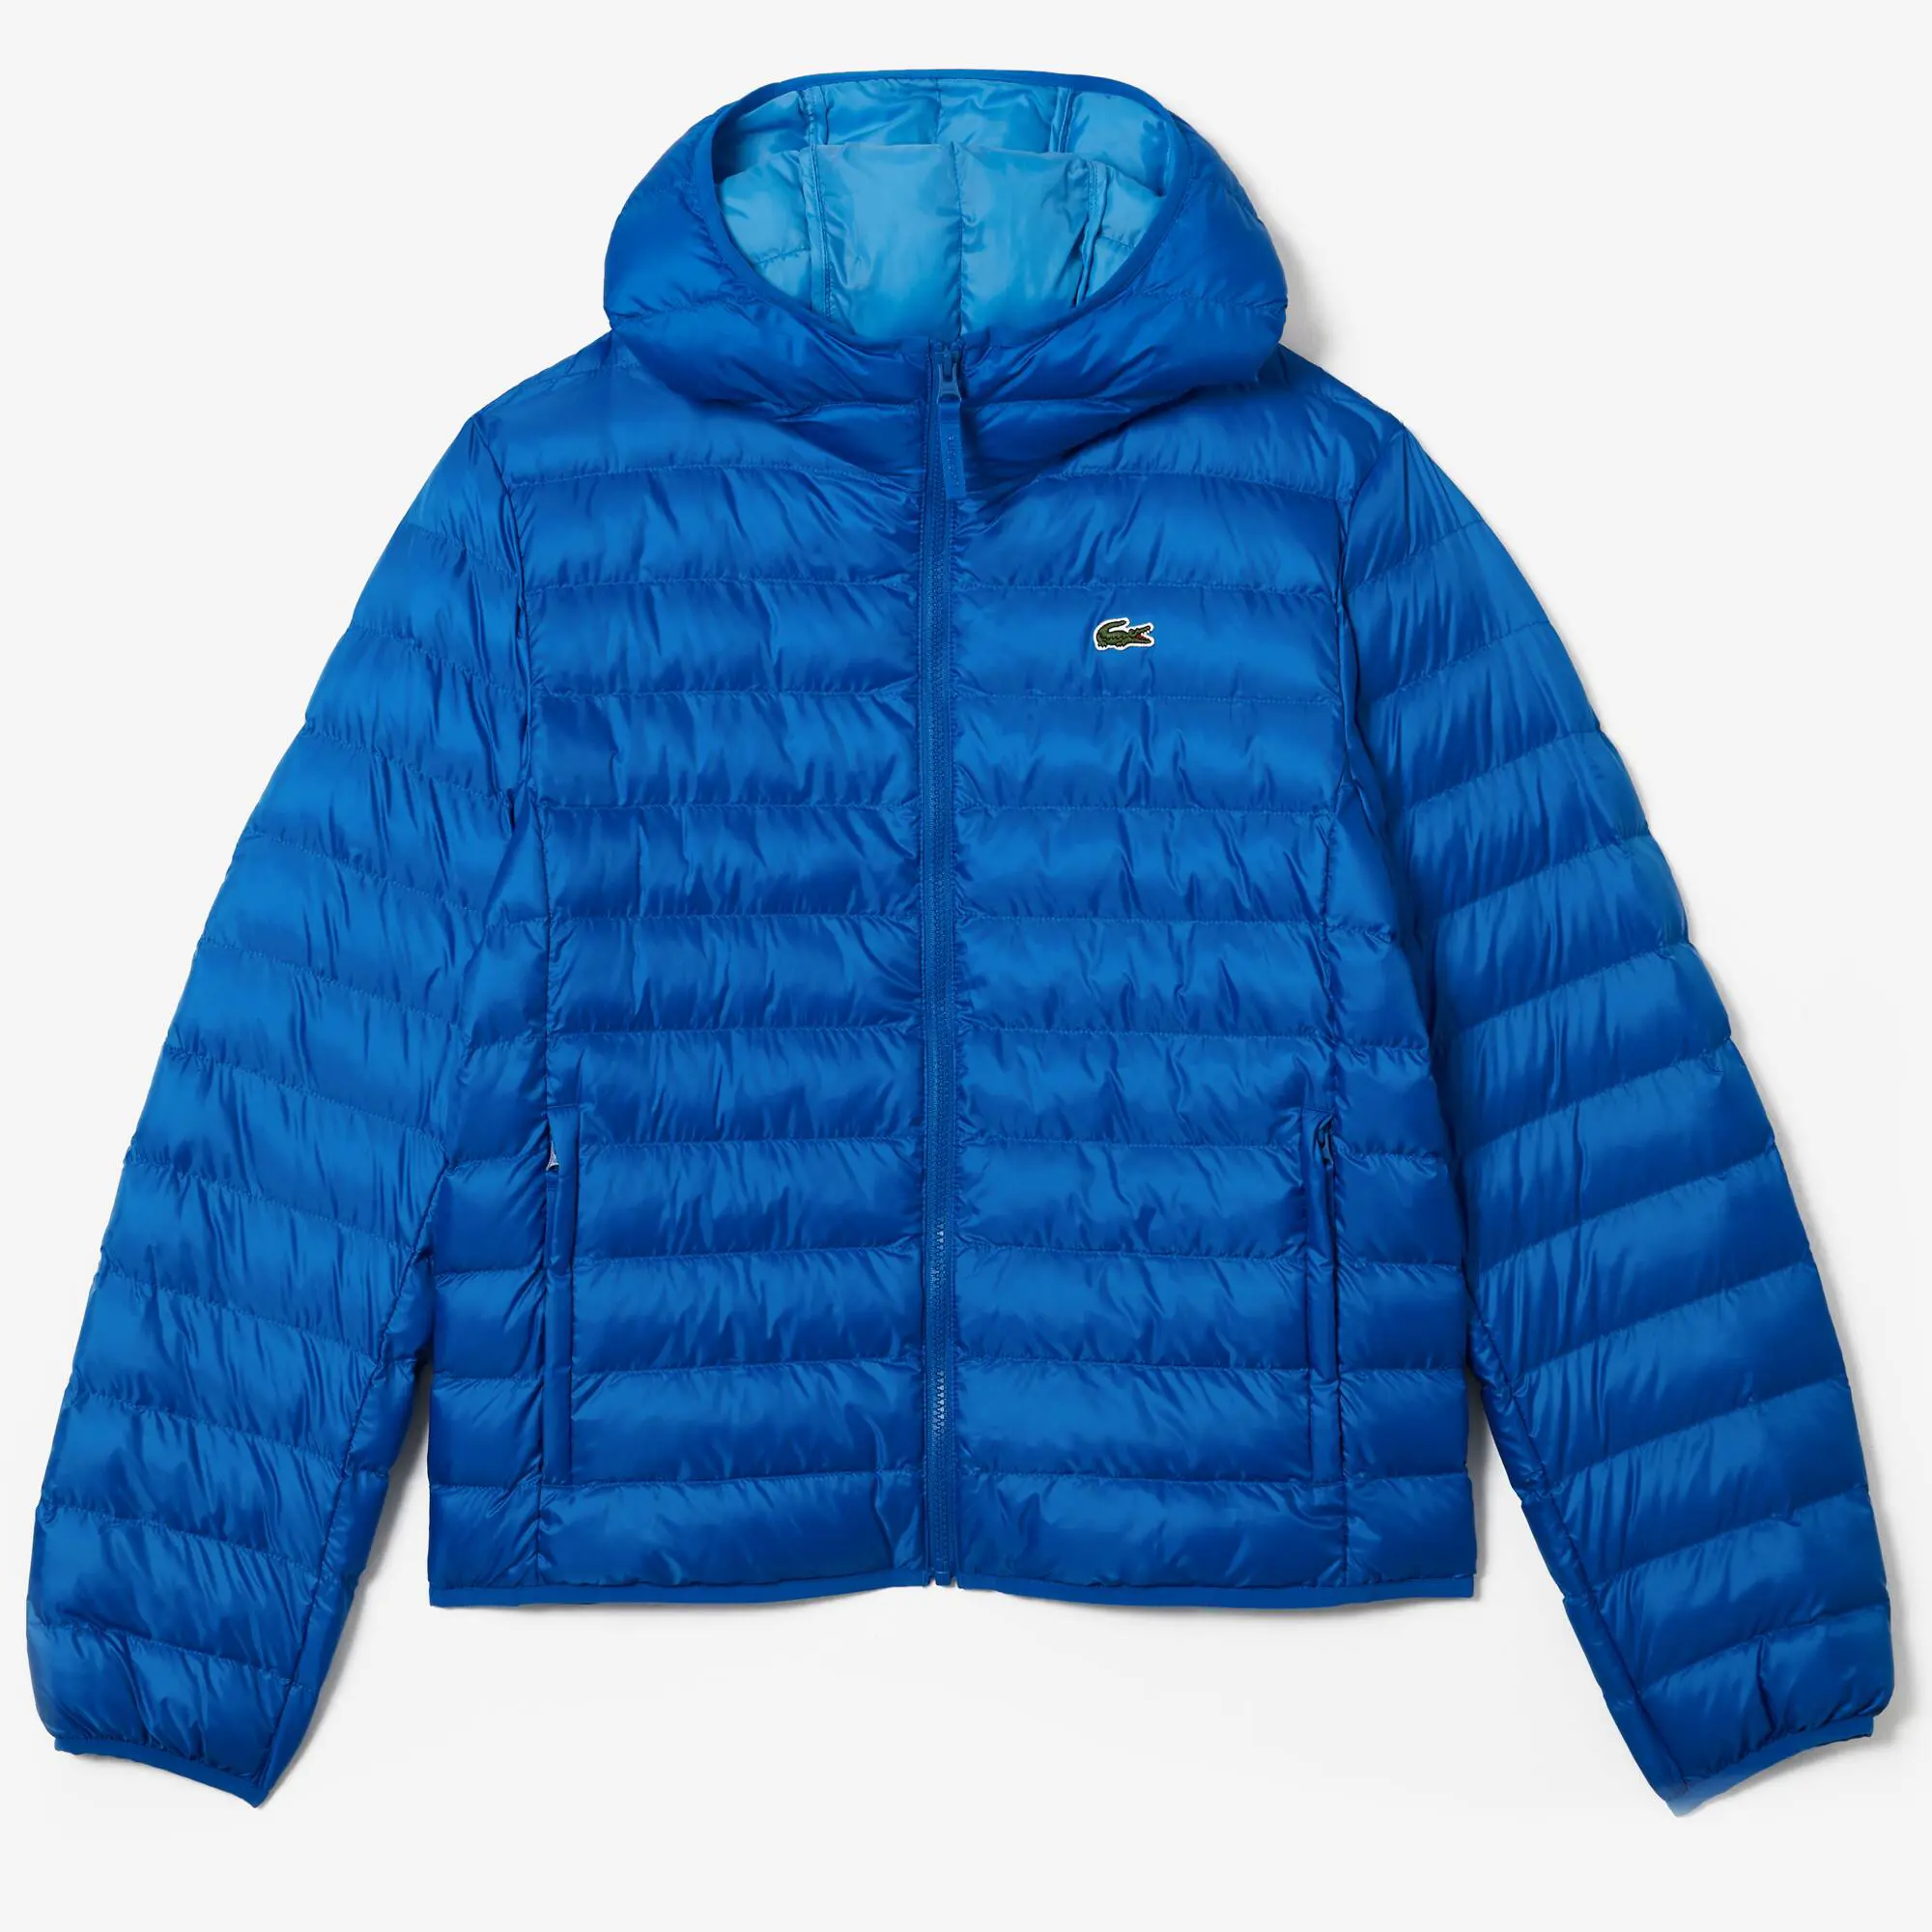 Lacoste Men's Quilted Jacket. 2